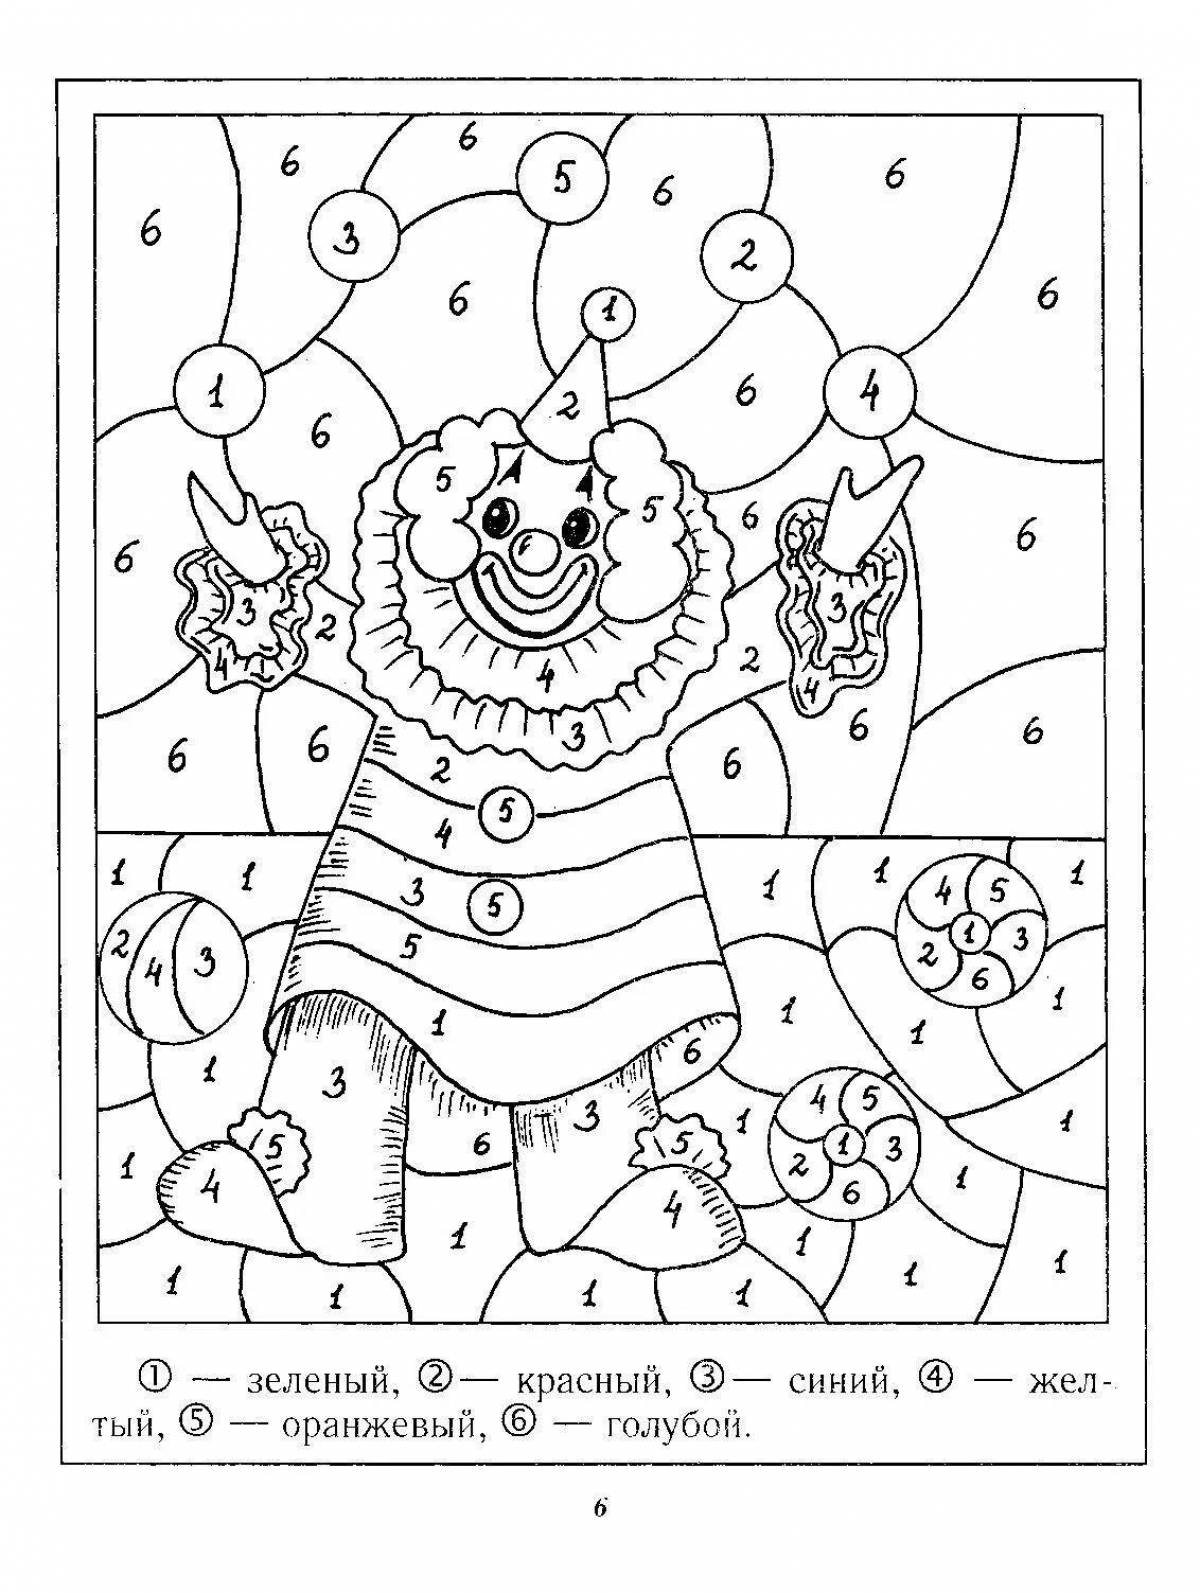 Coloring book for children by numbers 6 7